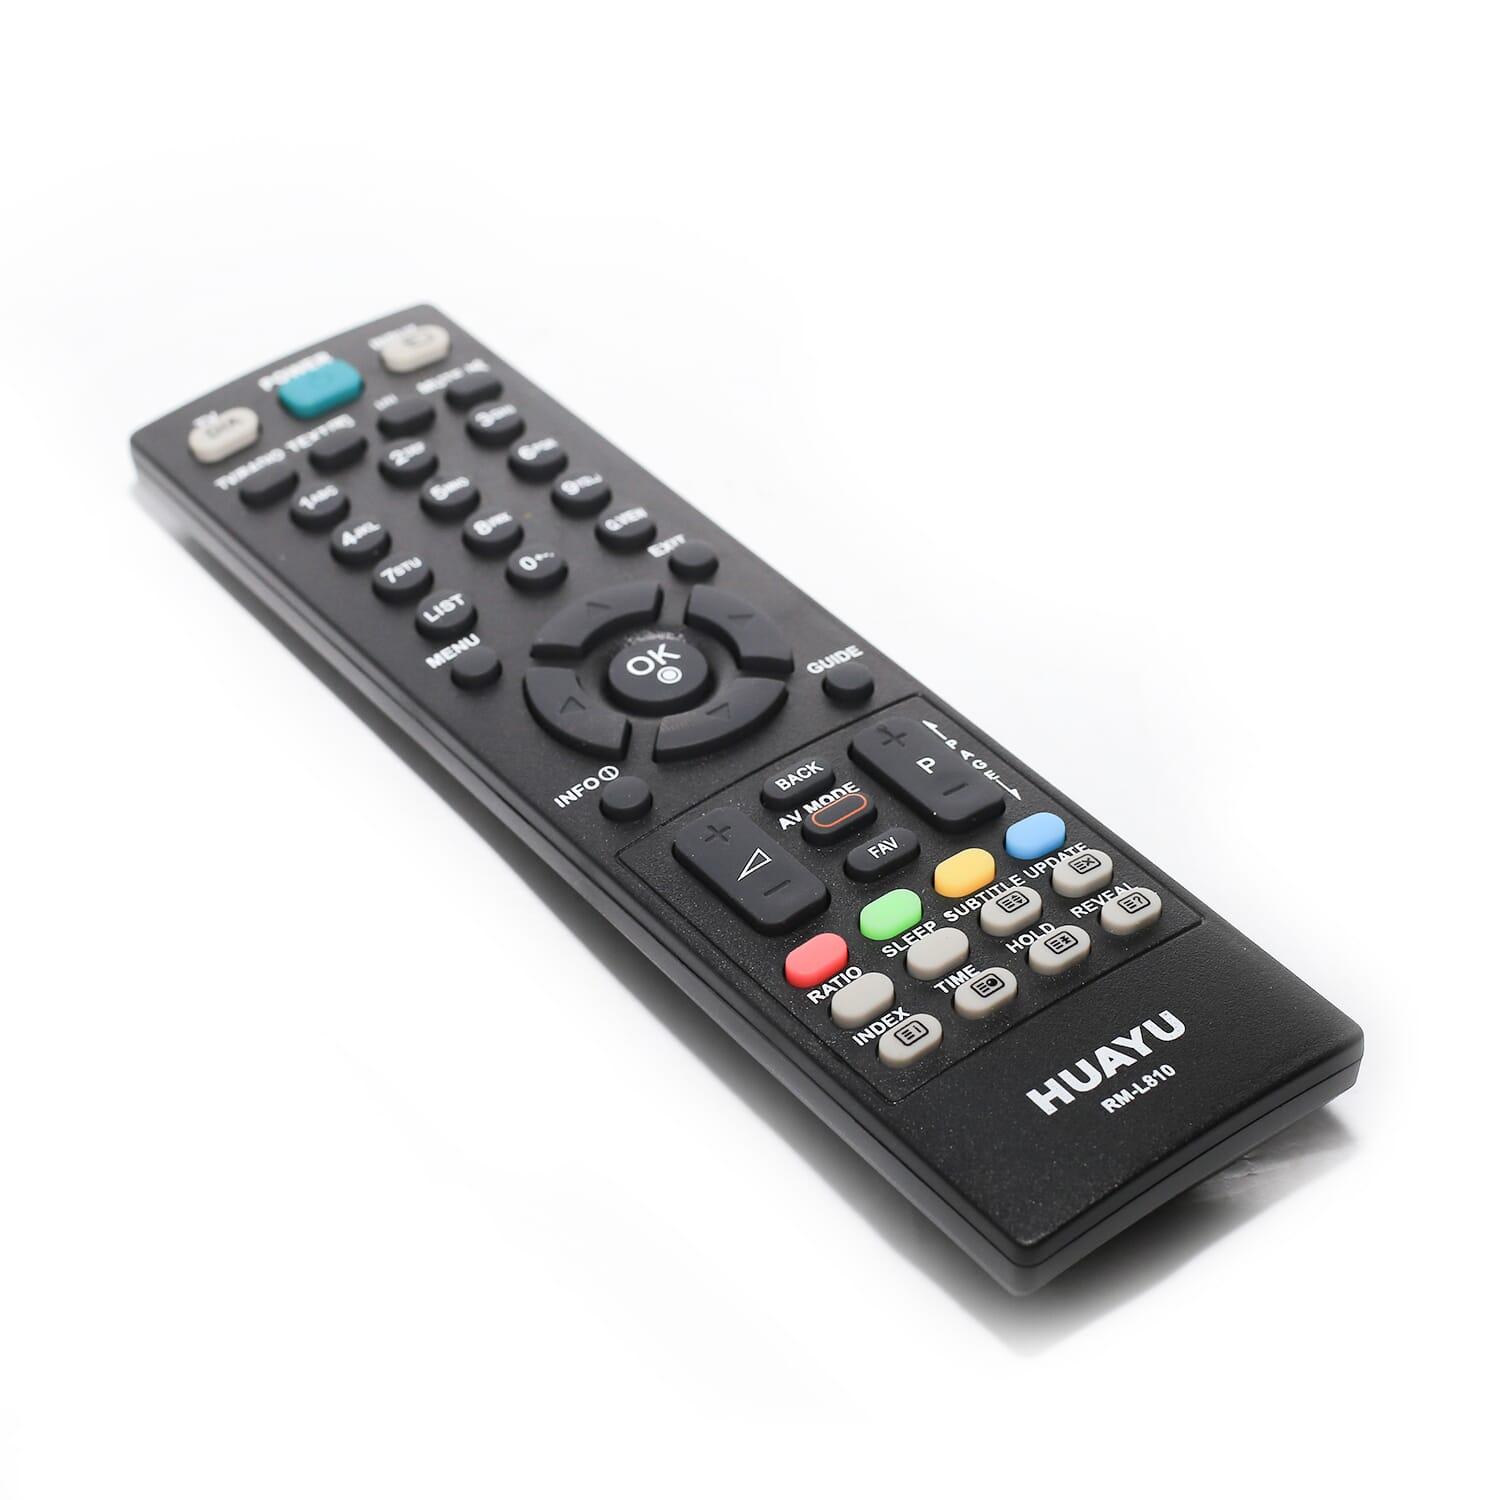 Huayu L810 Lg Tv Remote For Mkj37815702 Buy Sell Online Best